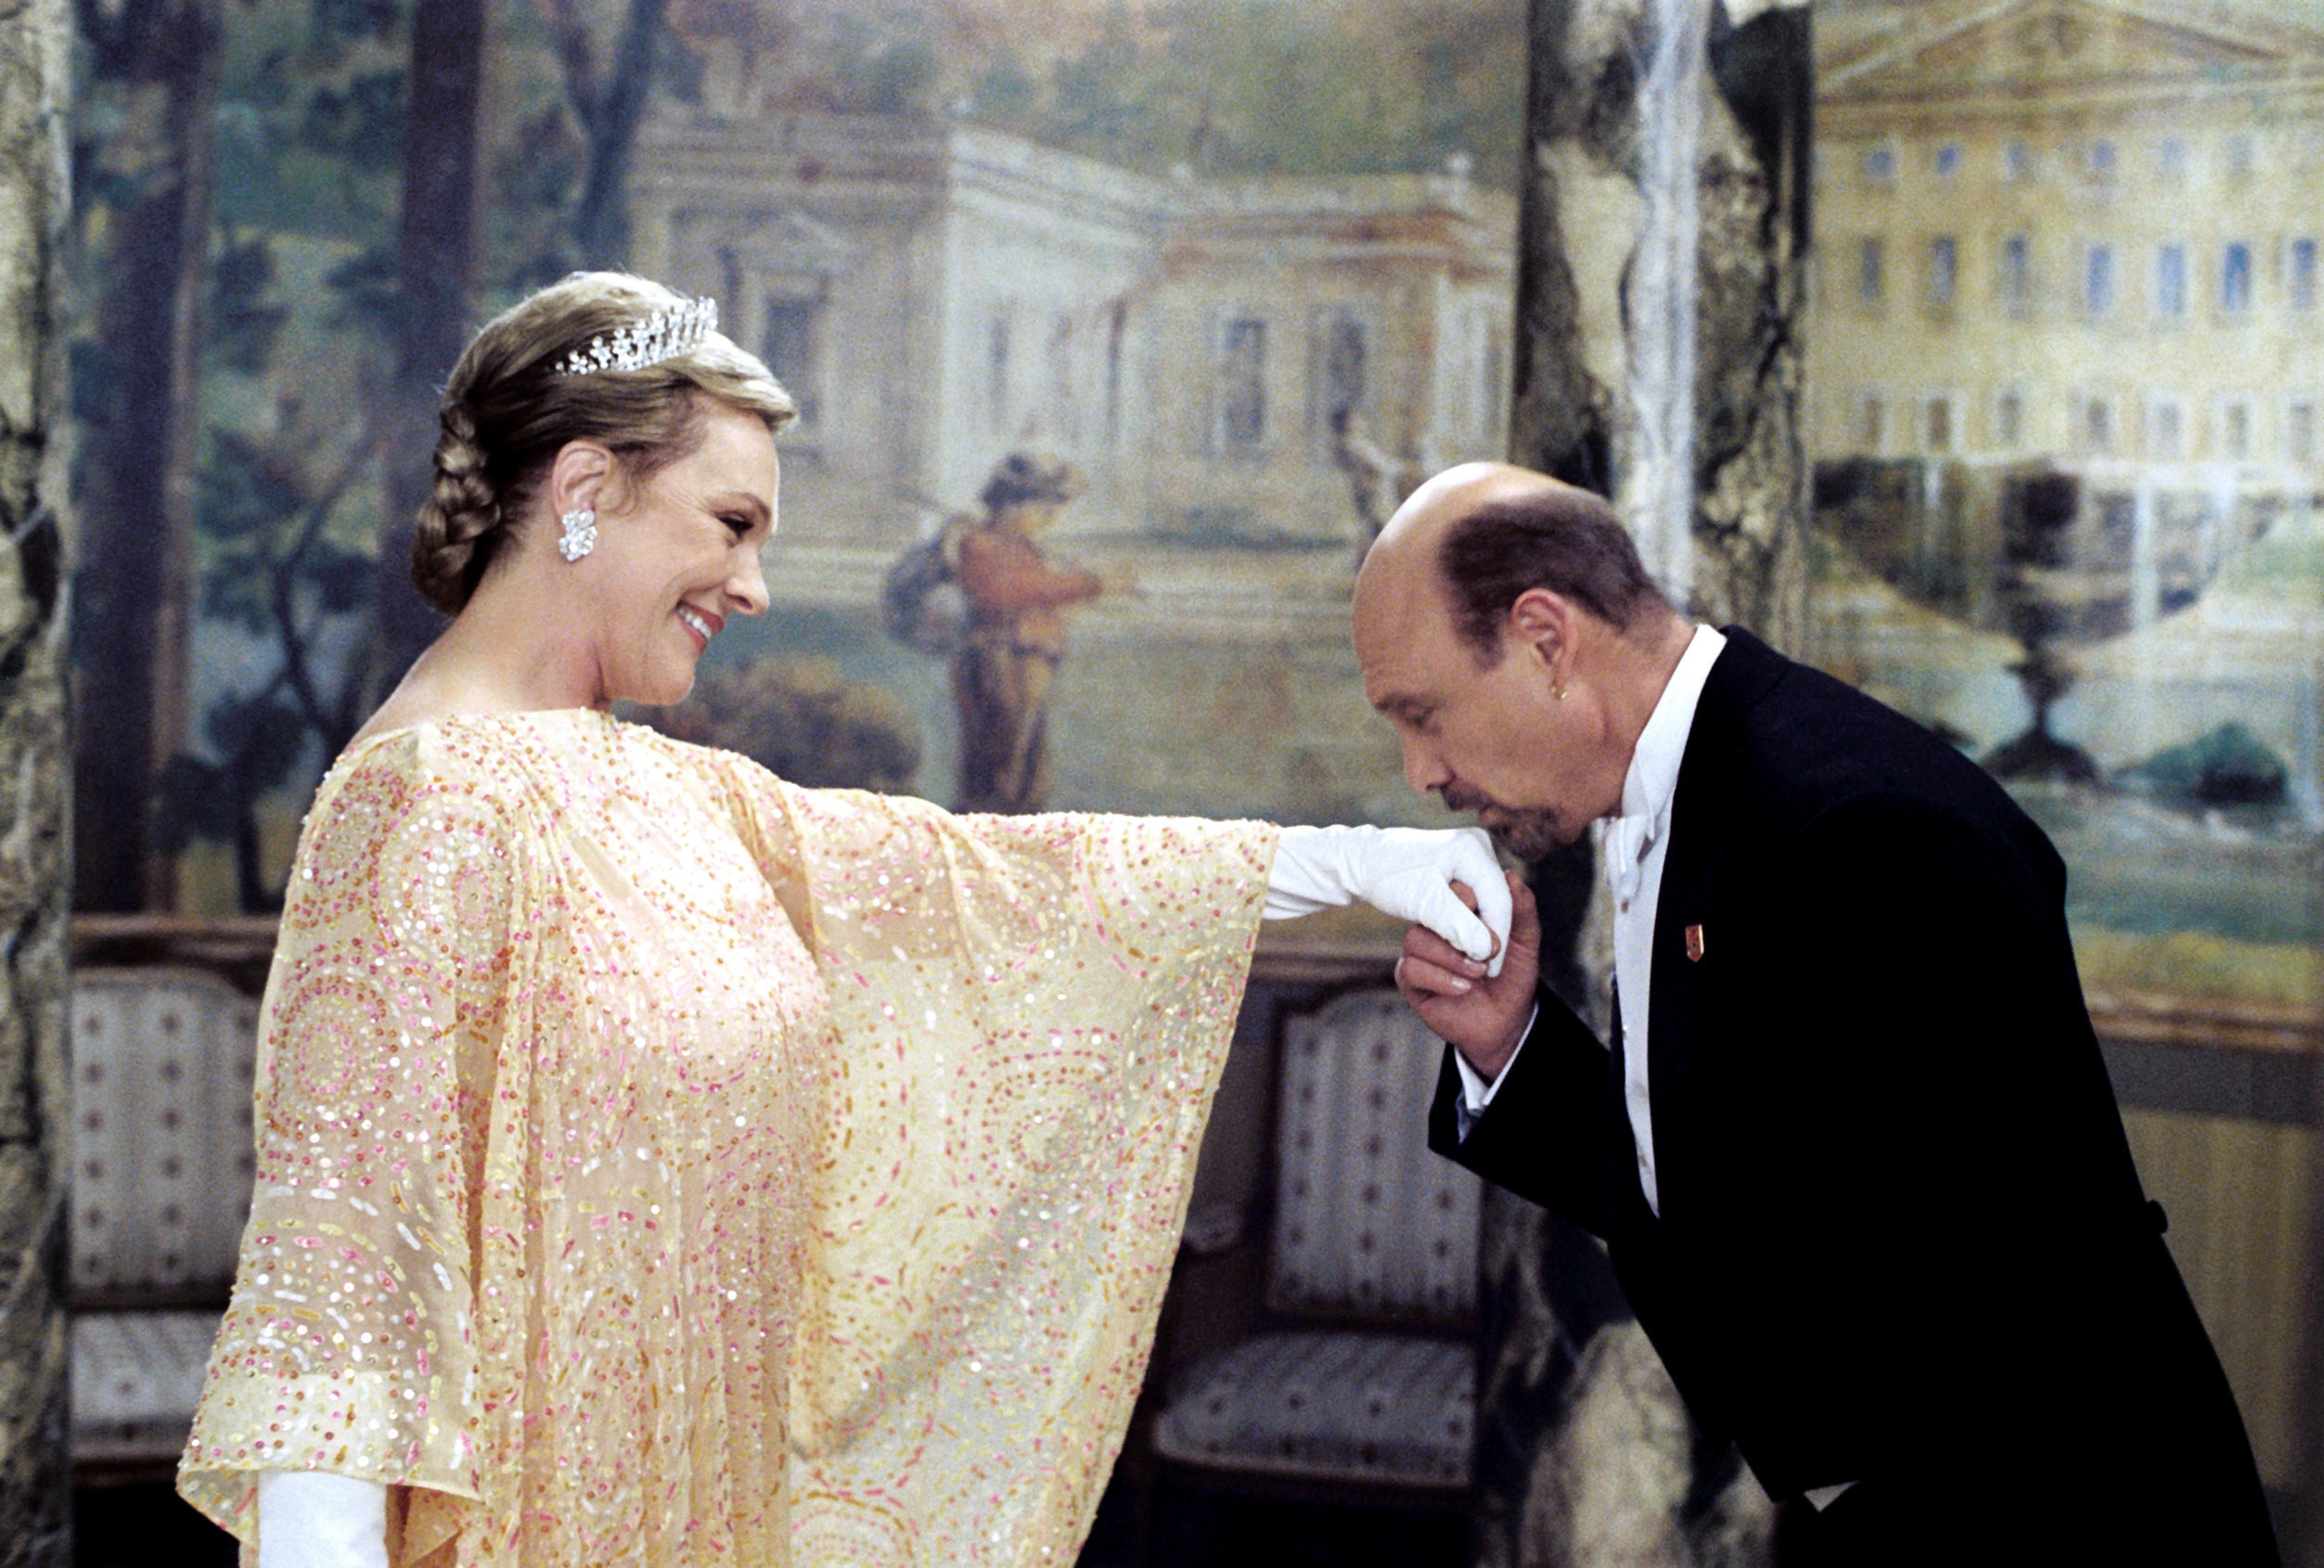 Julie Andrews as the Queen gets her hand kissed by her head of security